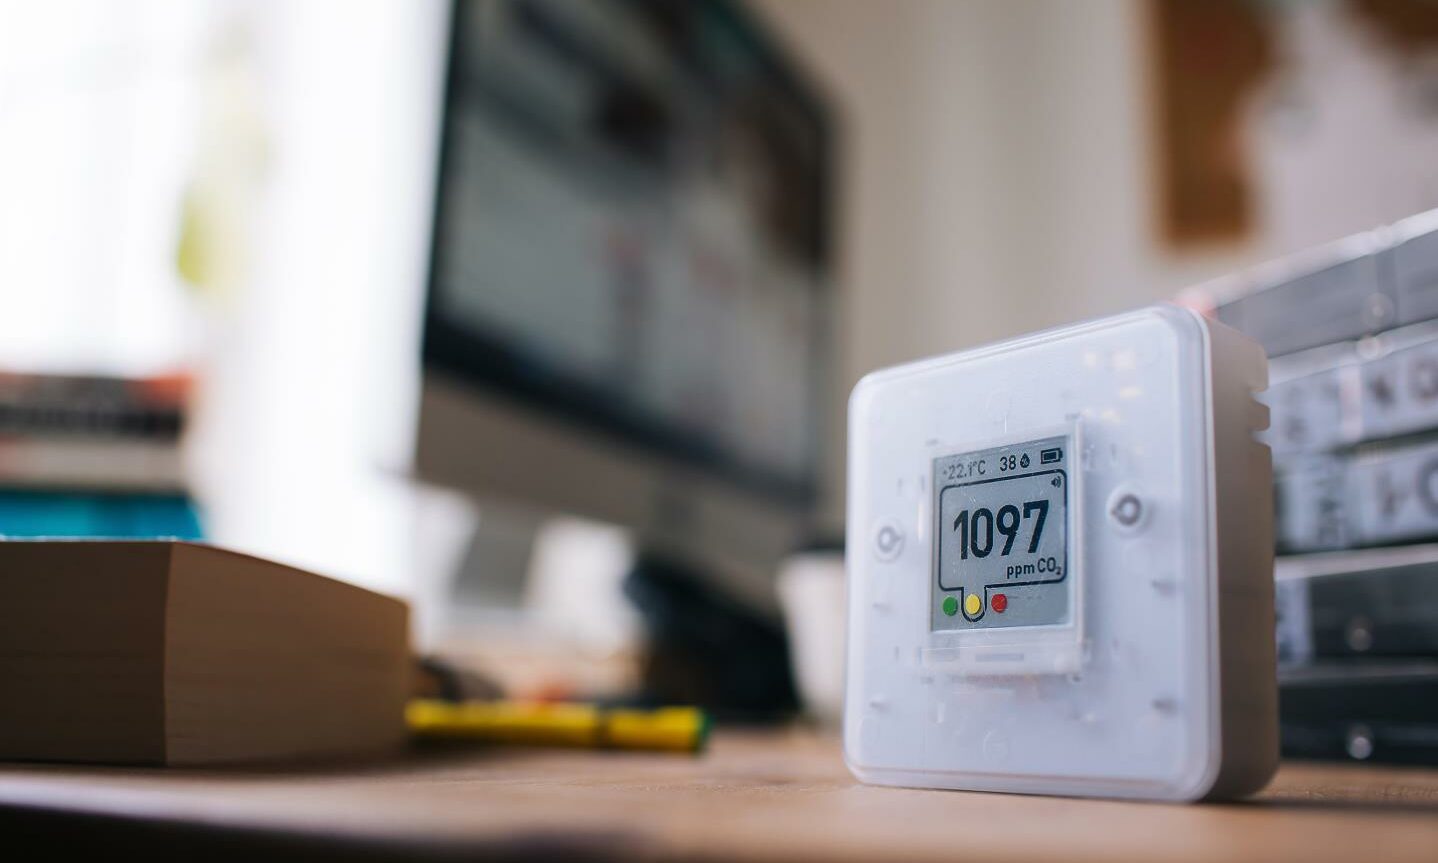 CO2 monitors are being used to assess air quality in schools.